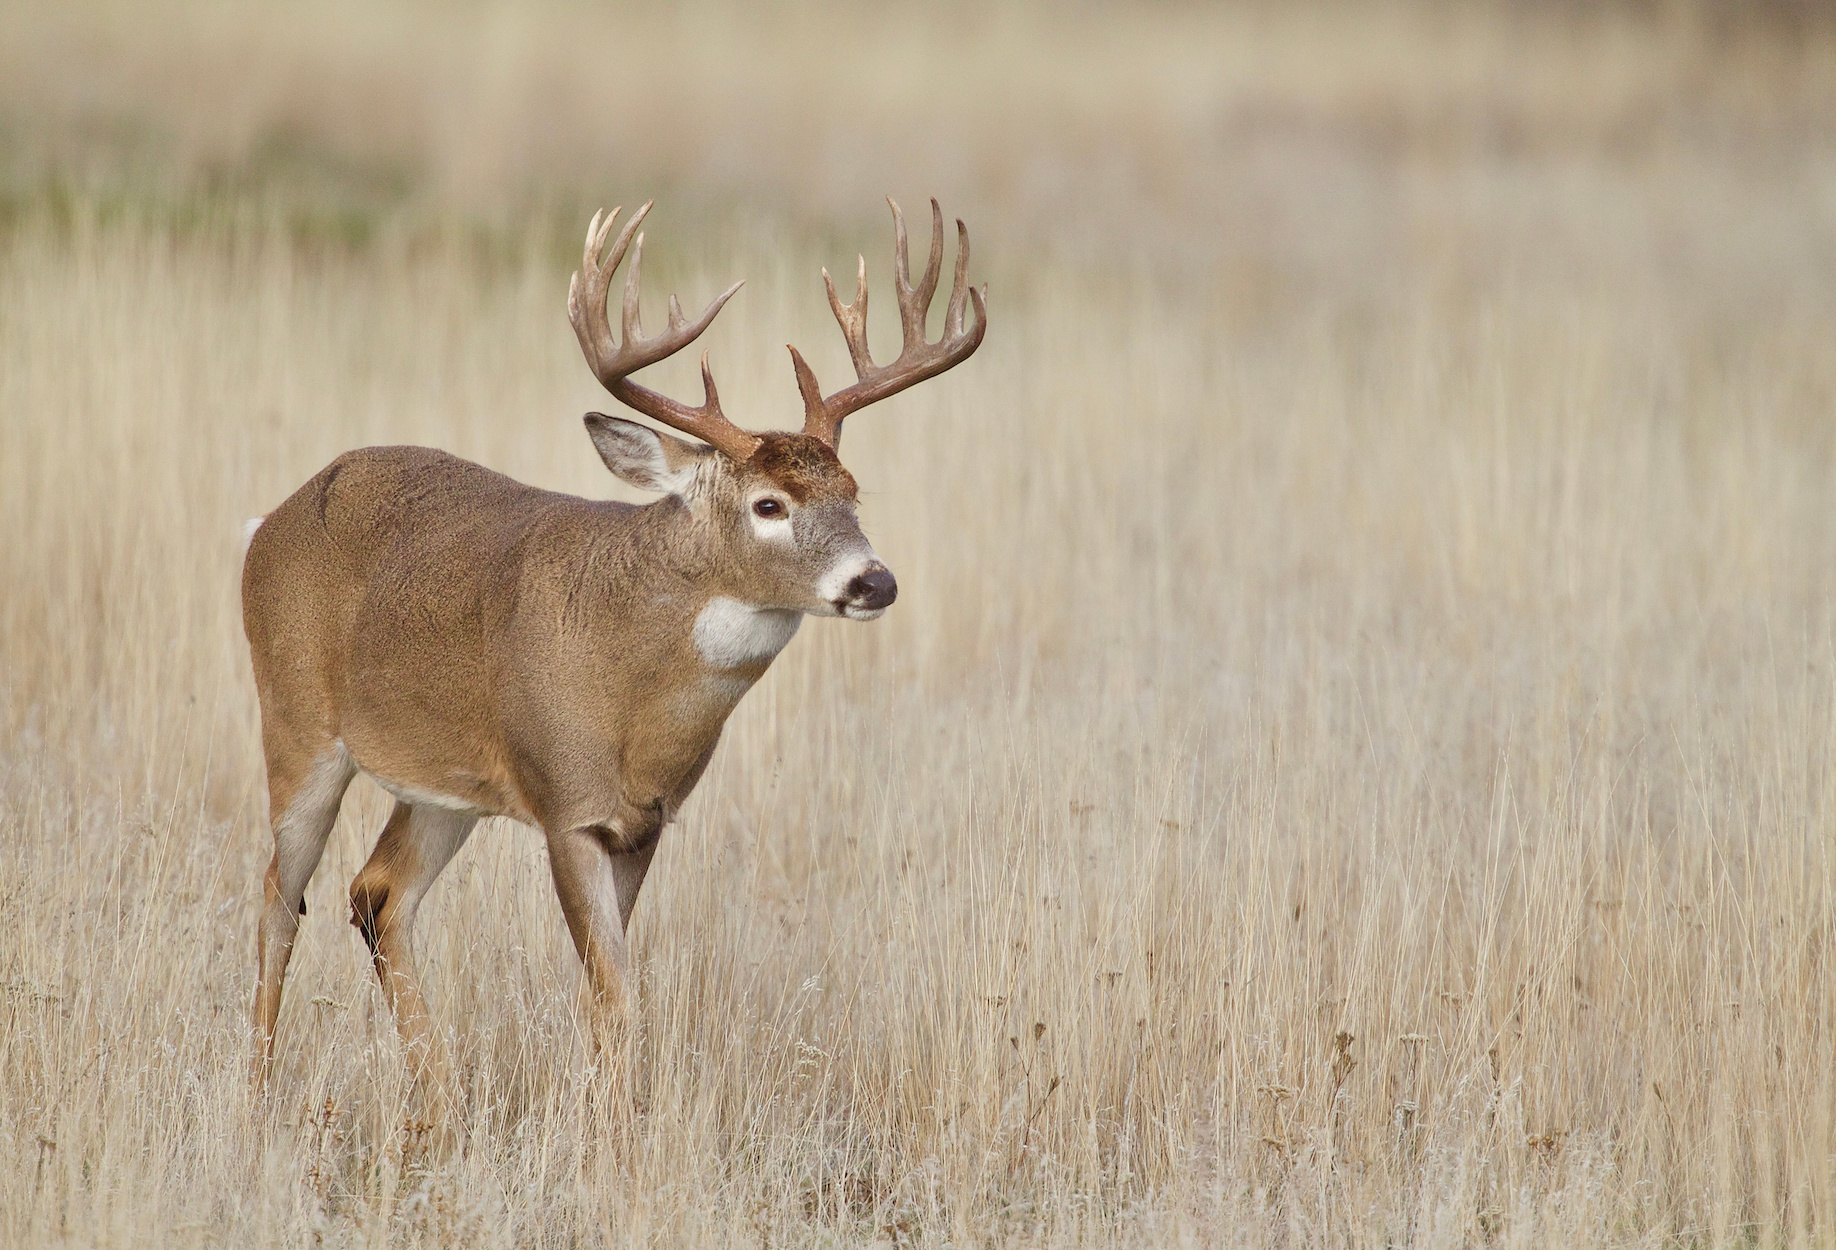 A whitetail buck in a grassy field.